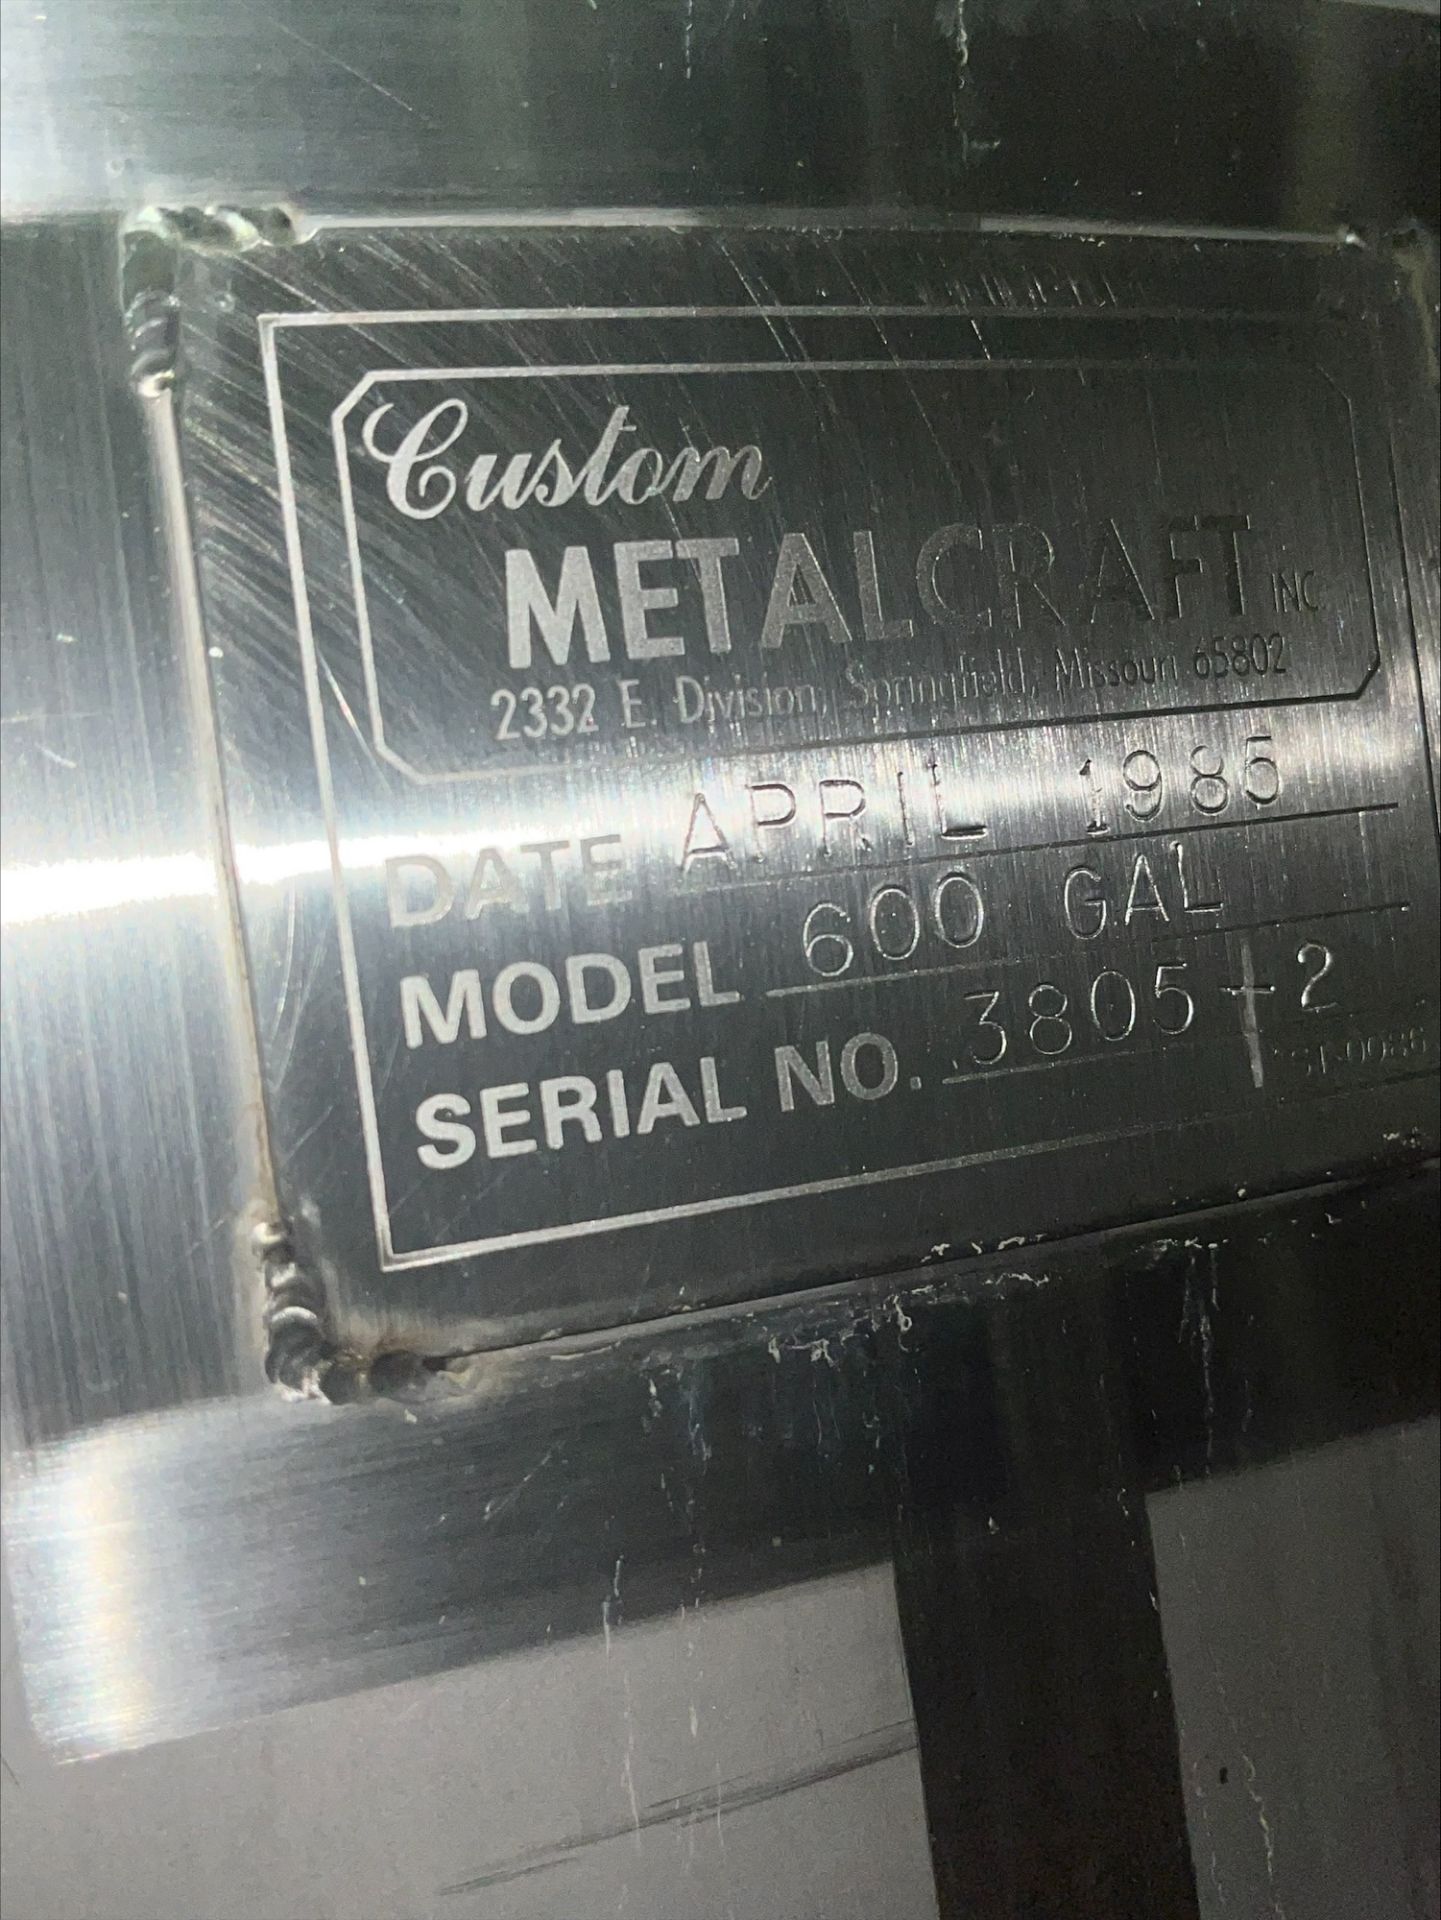 METALCRAFT MODEL 600 GAL S/S TANK SERIAL NO:3805-2 DATE 1985 E-2 YIELD TANK A T07/4 600 GAL - Image 3 of 3